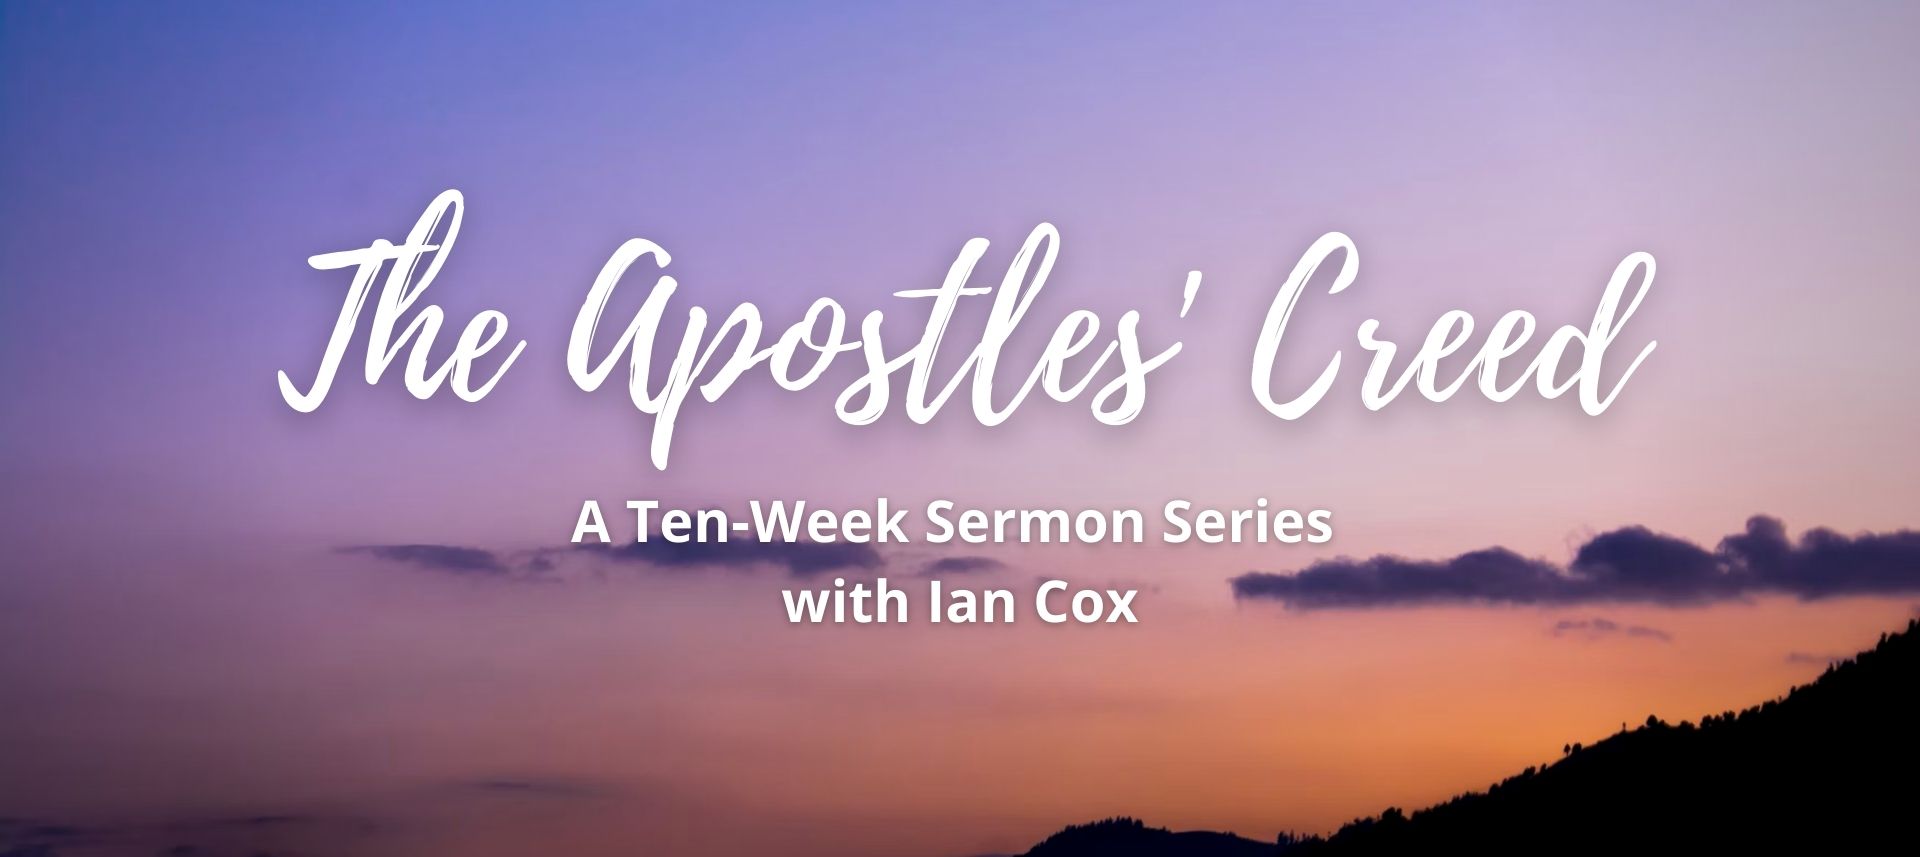 The Apostles' Creed - A ten-week series with Ian Cox